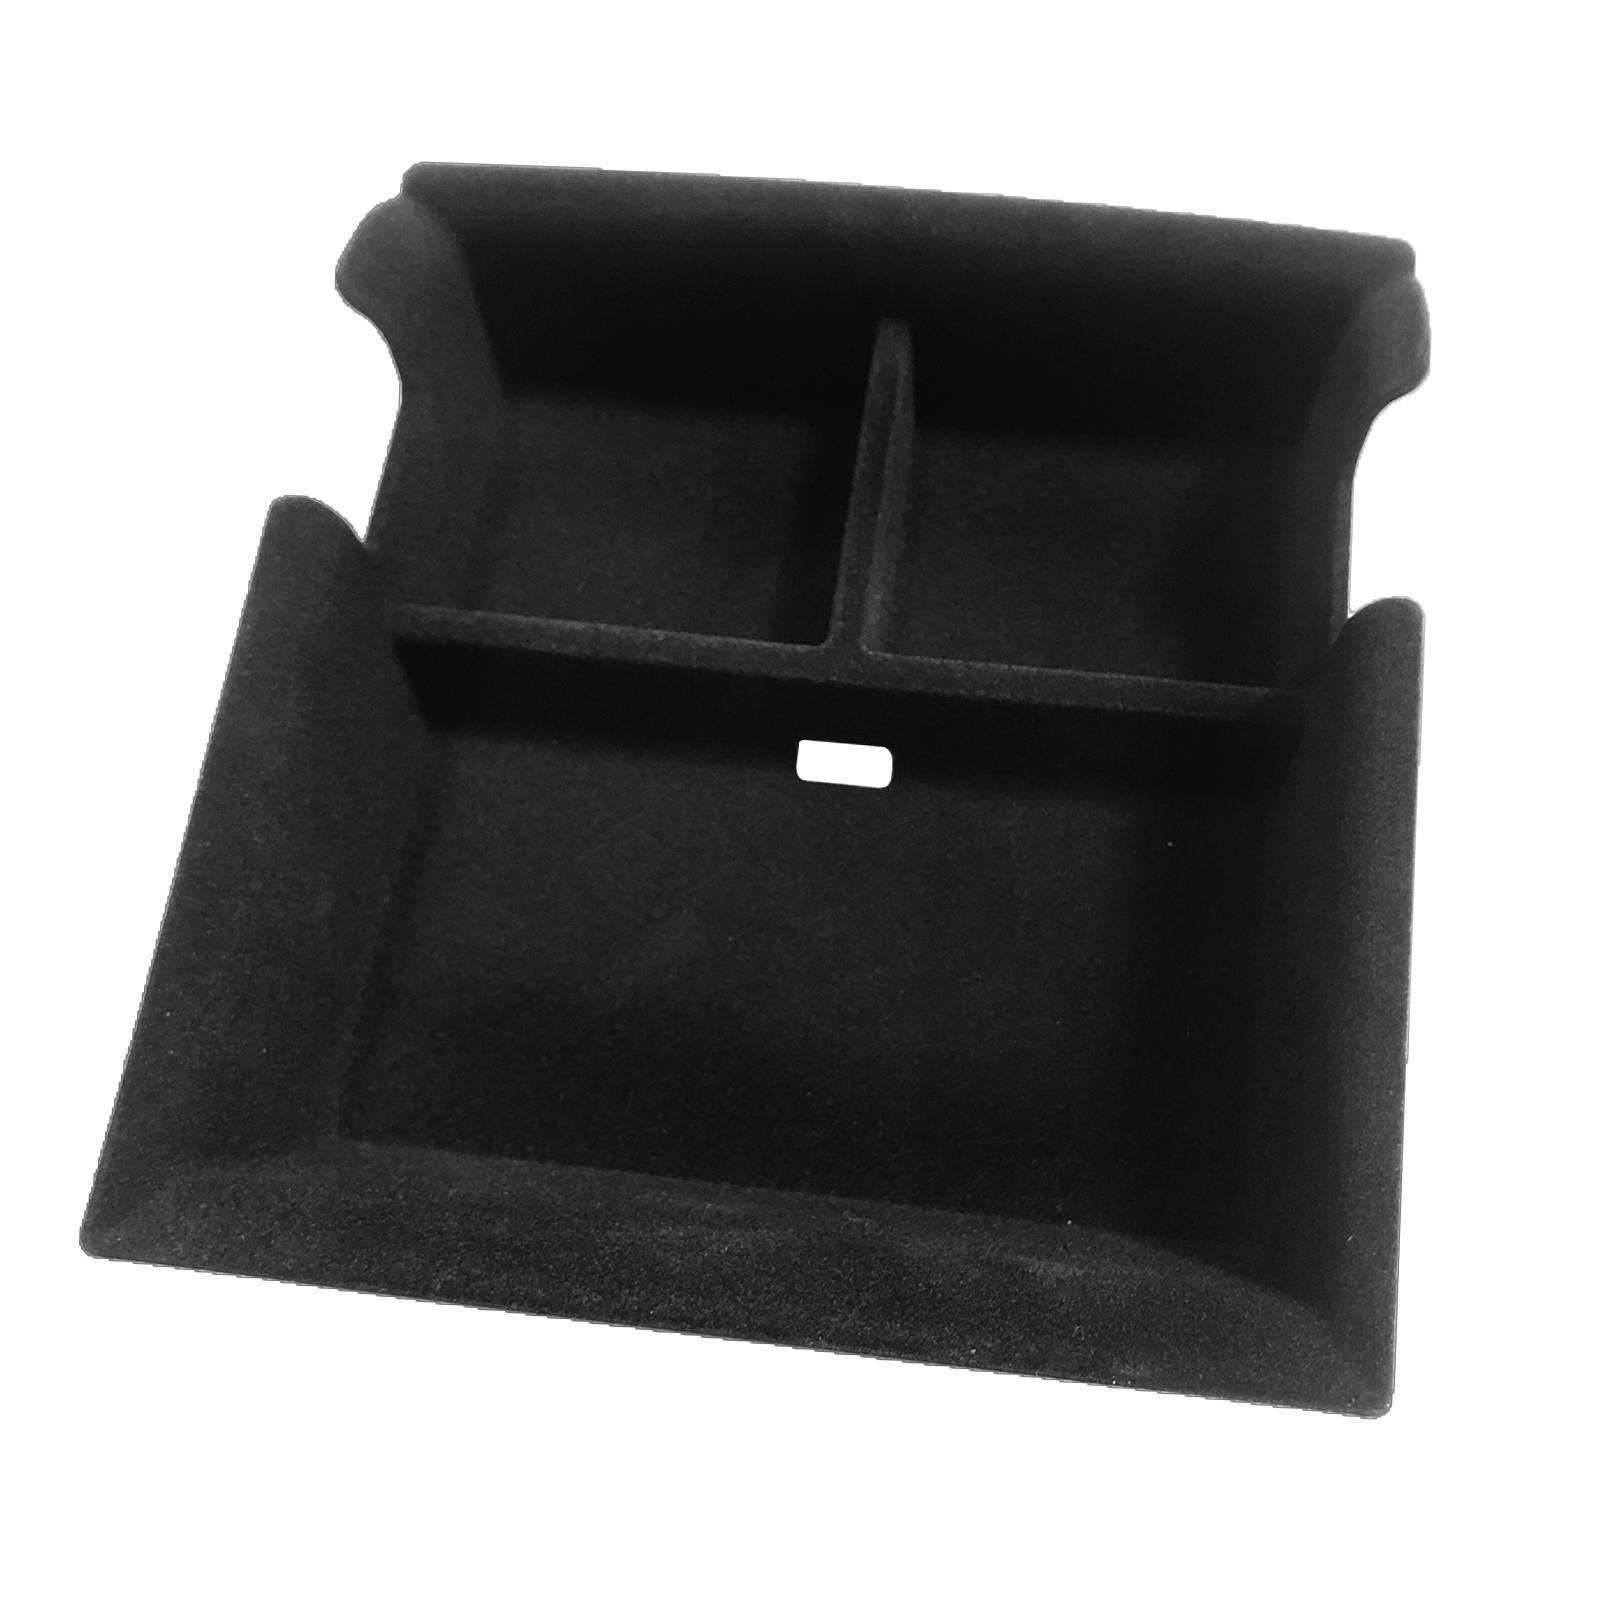 Automotive Center Console Insert Organizer Tray for Byd Yuan Plus